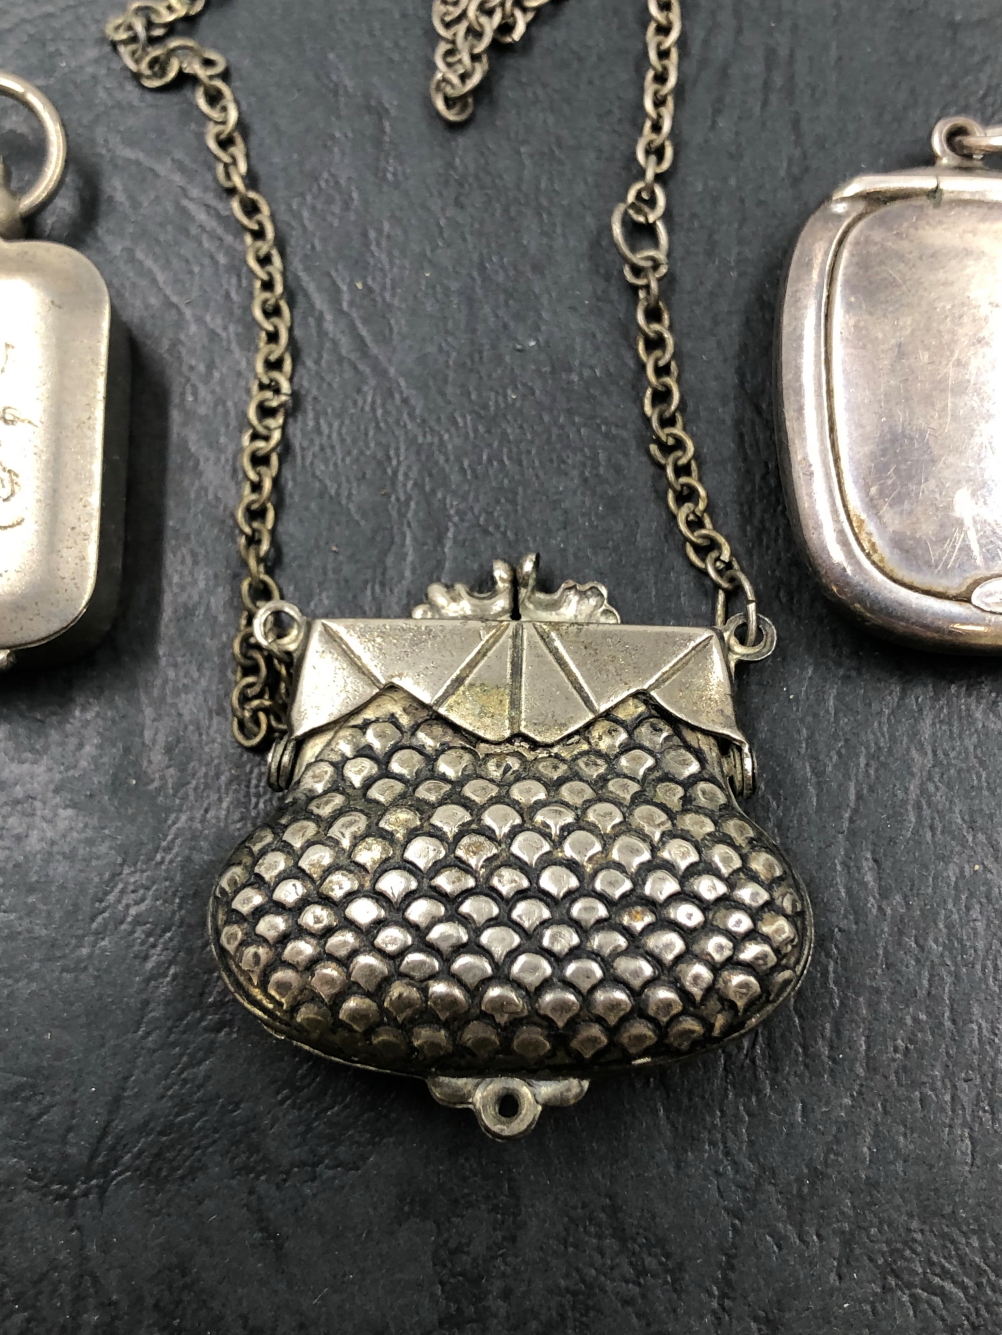 A HALLMARKED SILVER SNUFF BOX WITH SUSPENSION RING, A NICKEL PURSE WITH CHAIN, AND A NICKEL MONOGRAM - Image 3 of 4